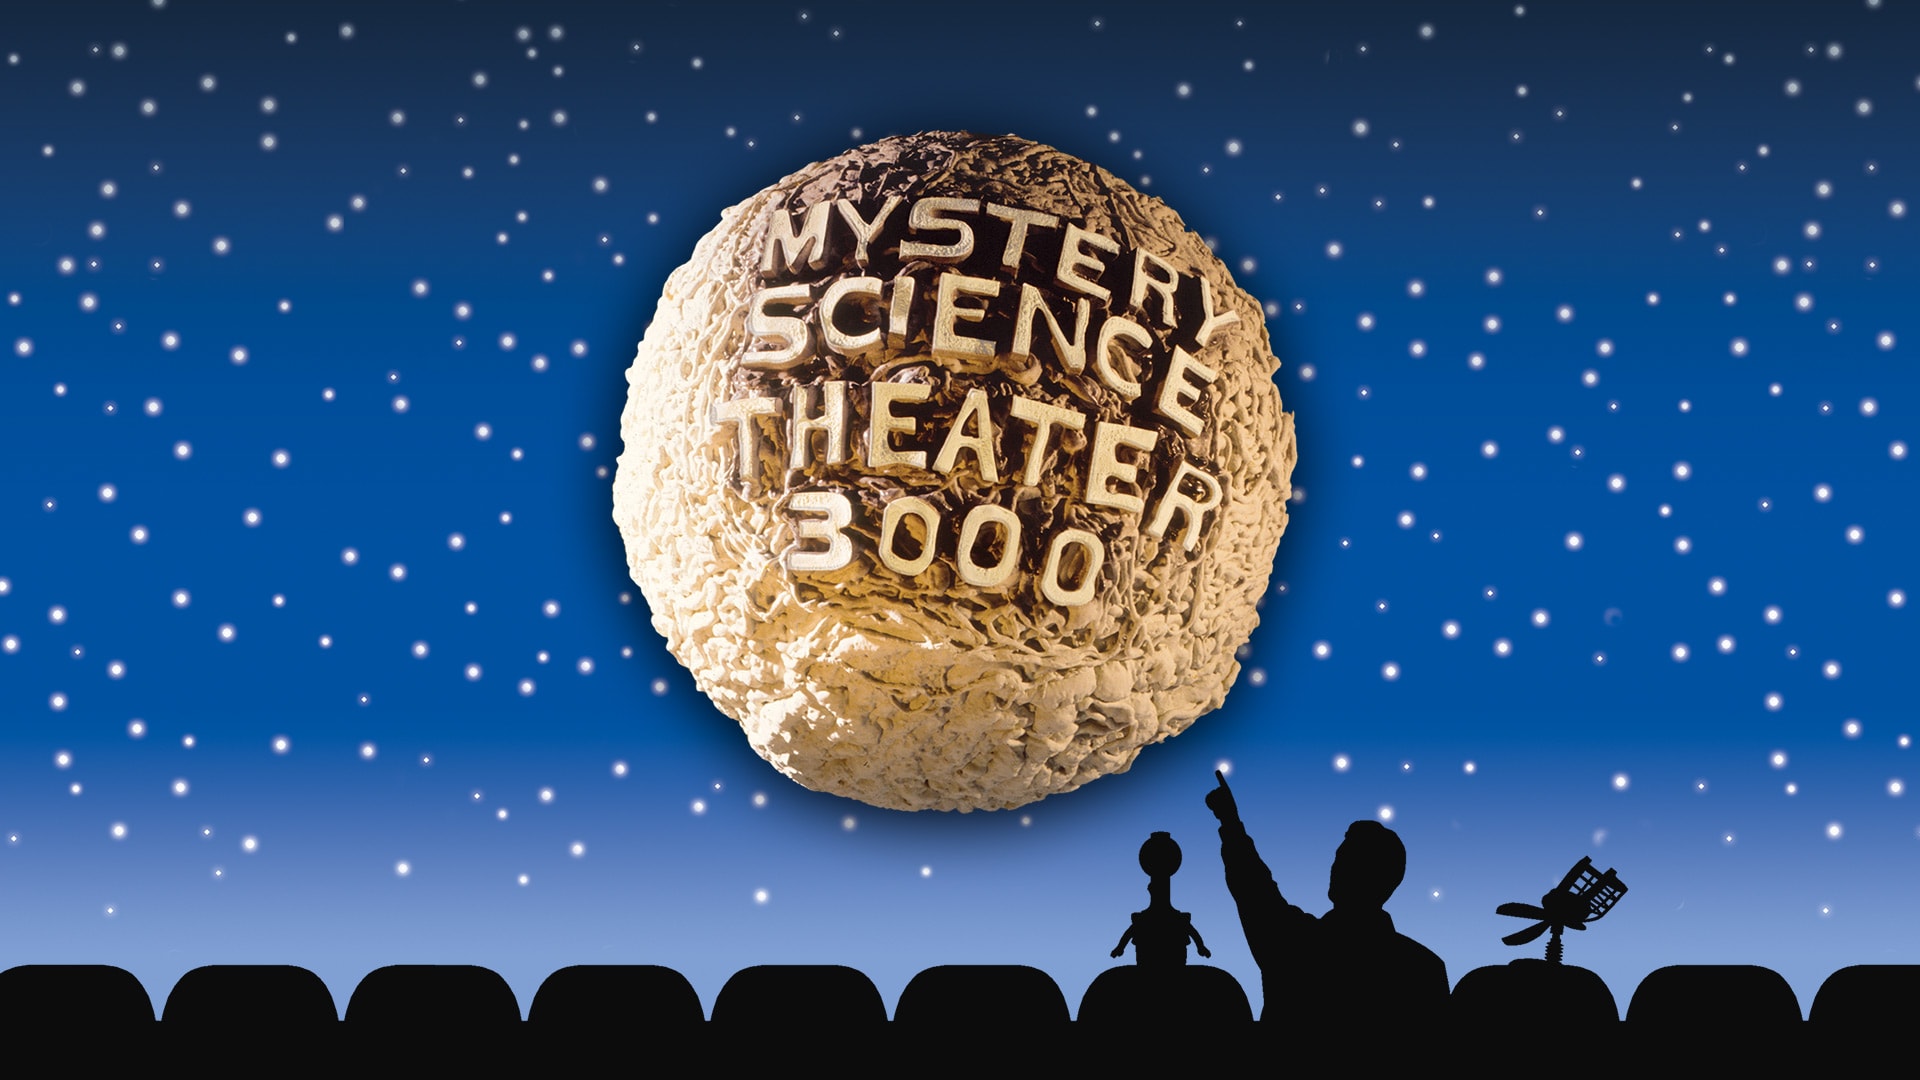 NFC Talks MST3K With Crow Performer Nate Begle